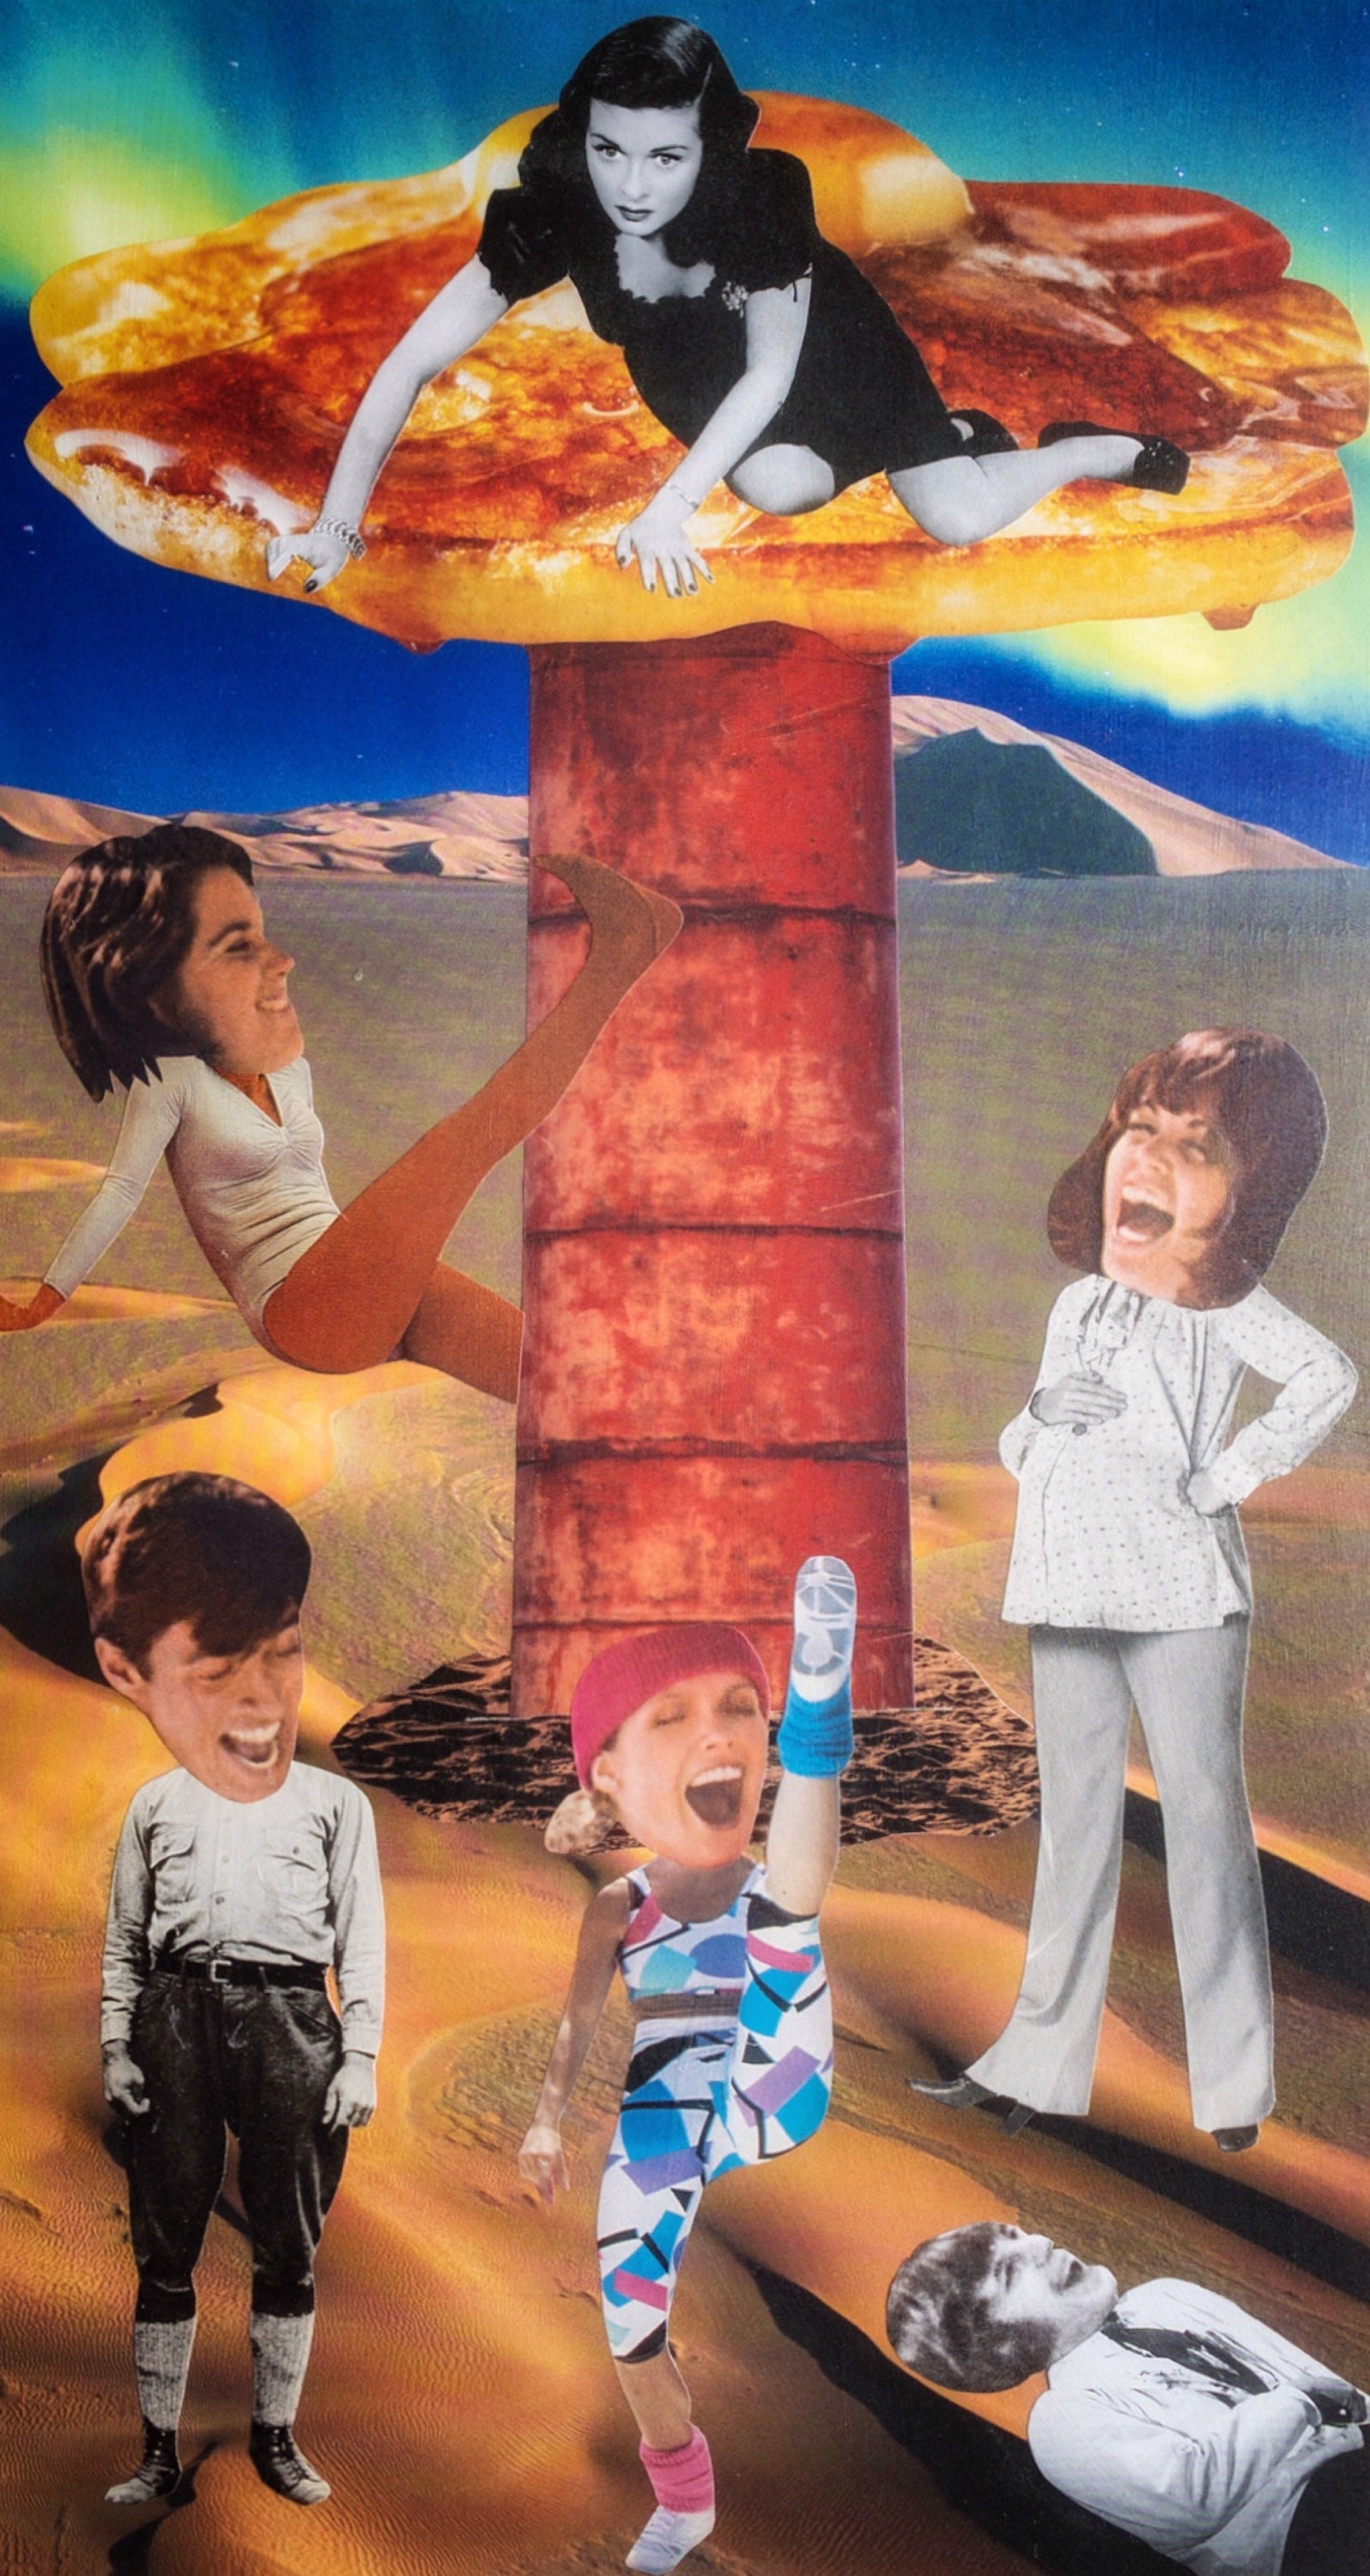 Where to get Free, Cheap, and Old Magazines to Make Surreal Collage Art 